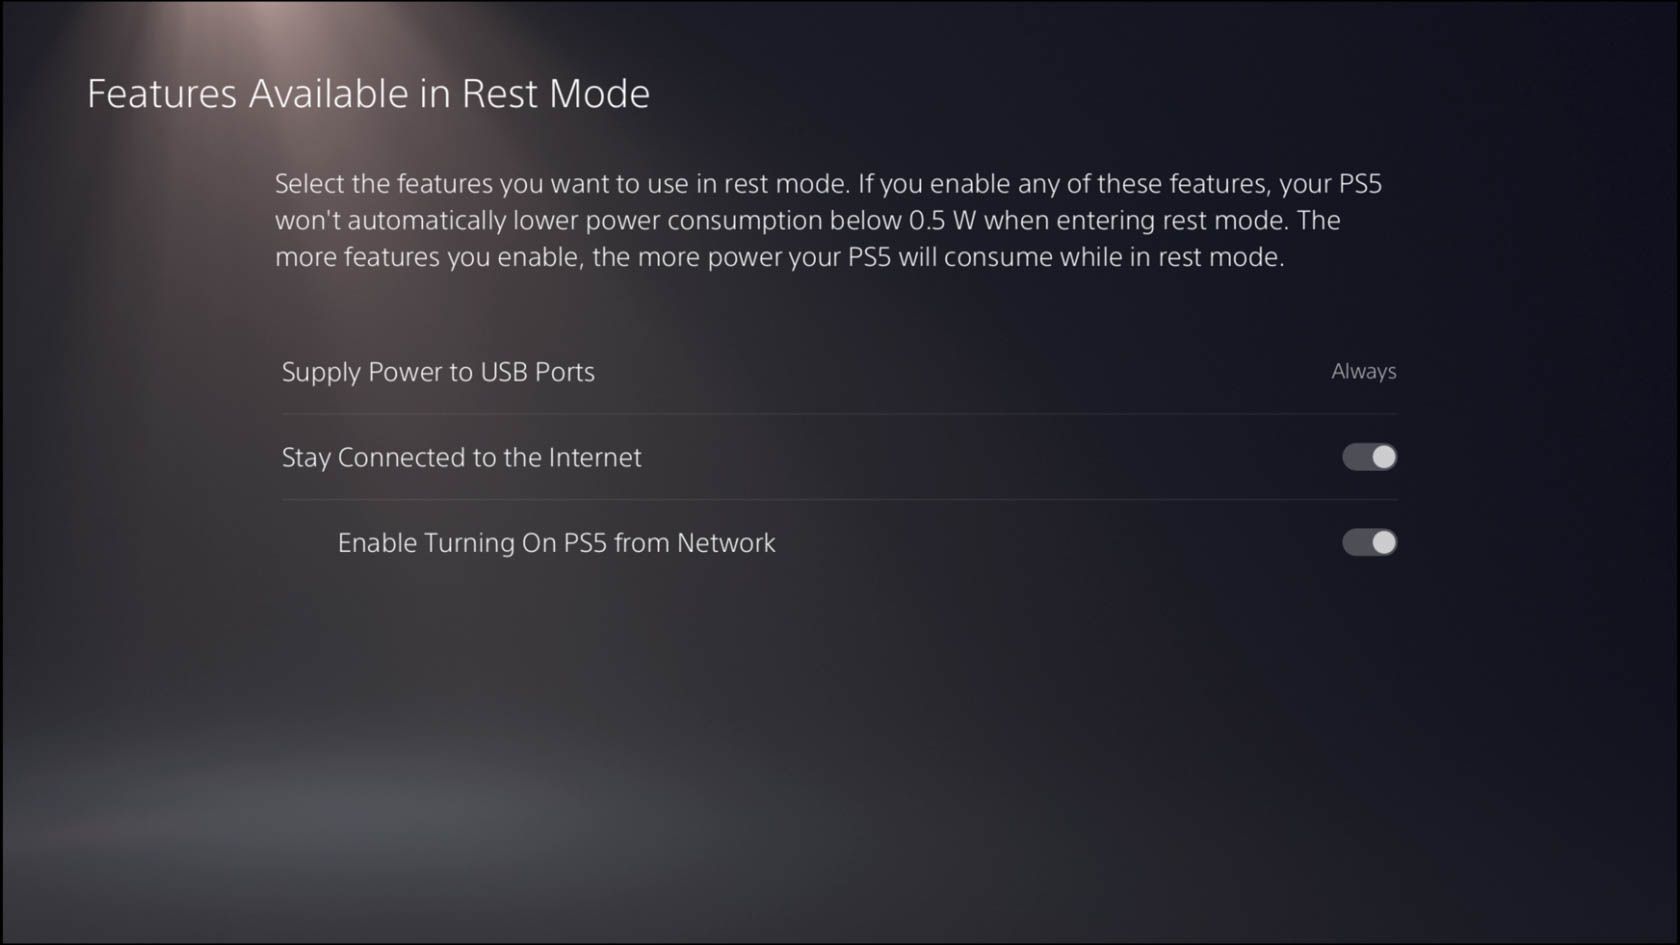 PS5 Rest Mode features